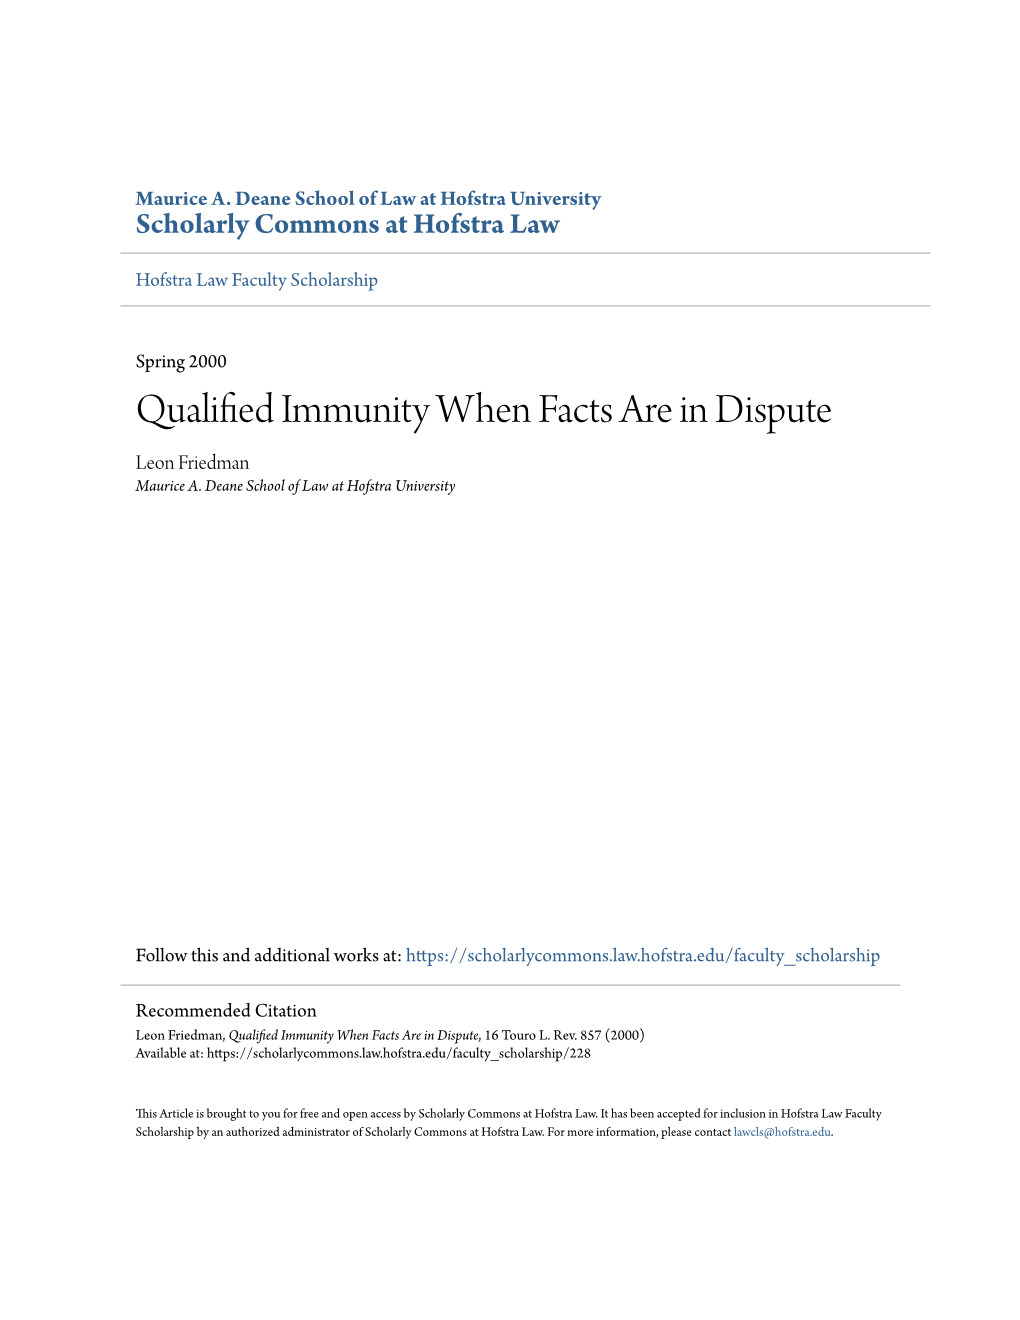 Qualified Immunity When Facts Are in Dispute, 16 Touro L